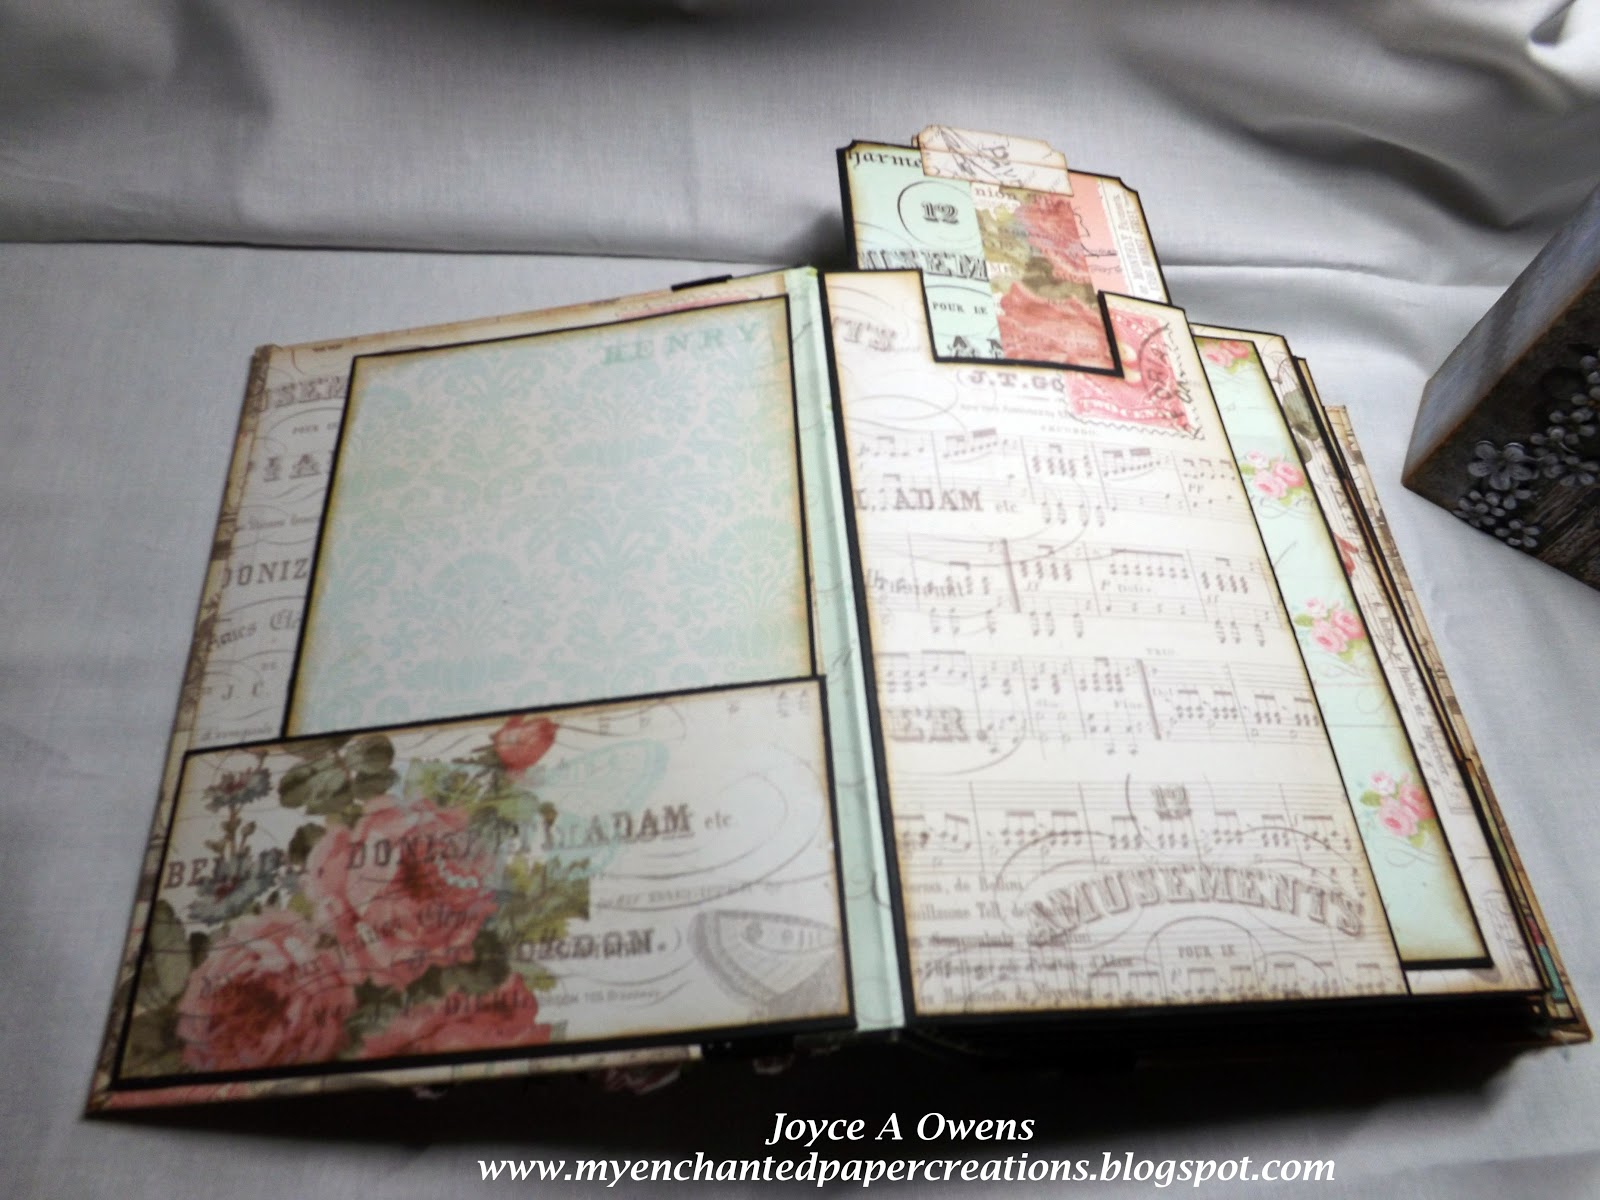 My Enchanted Paper Creations: All Occasions Mini Album